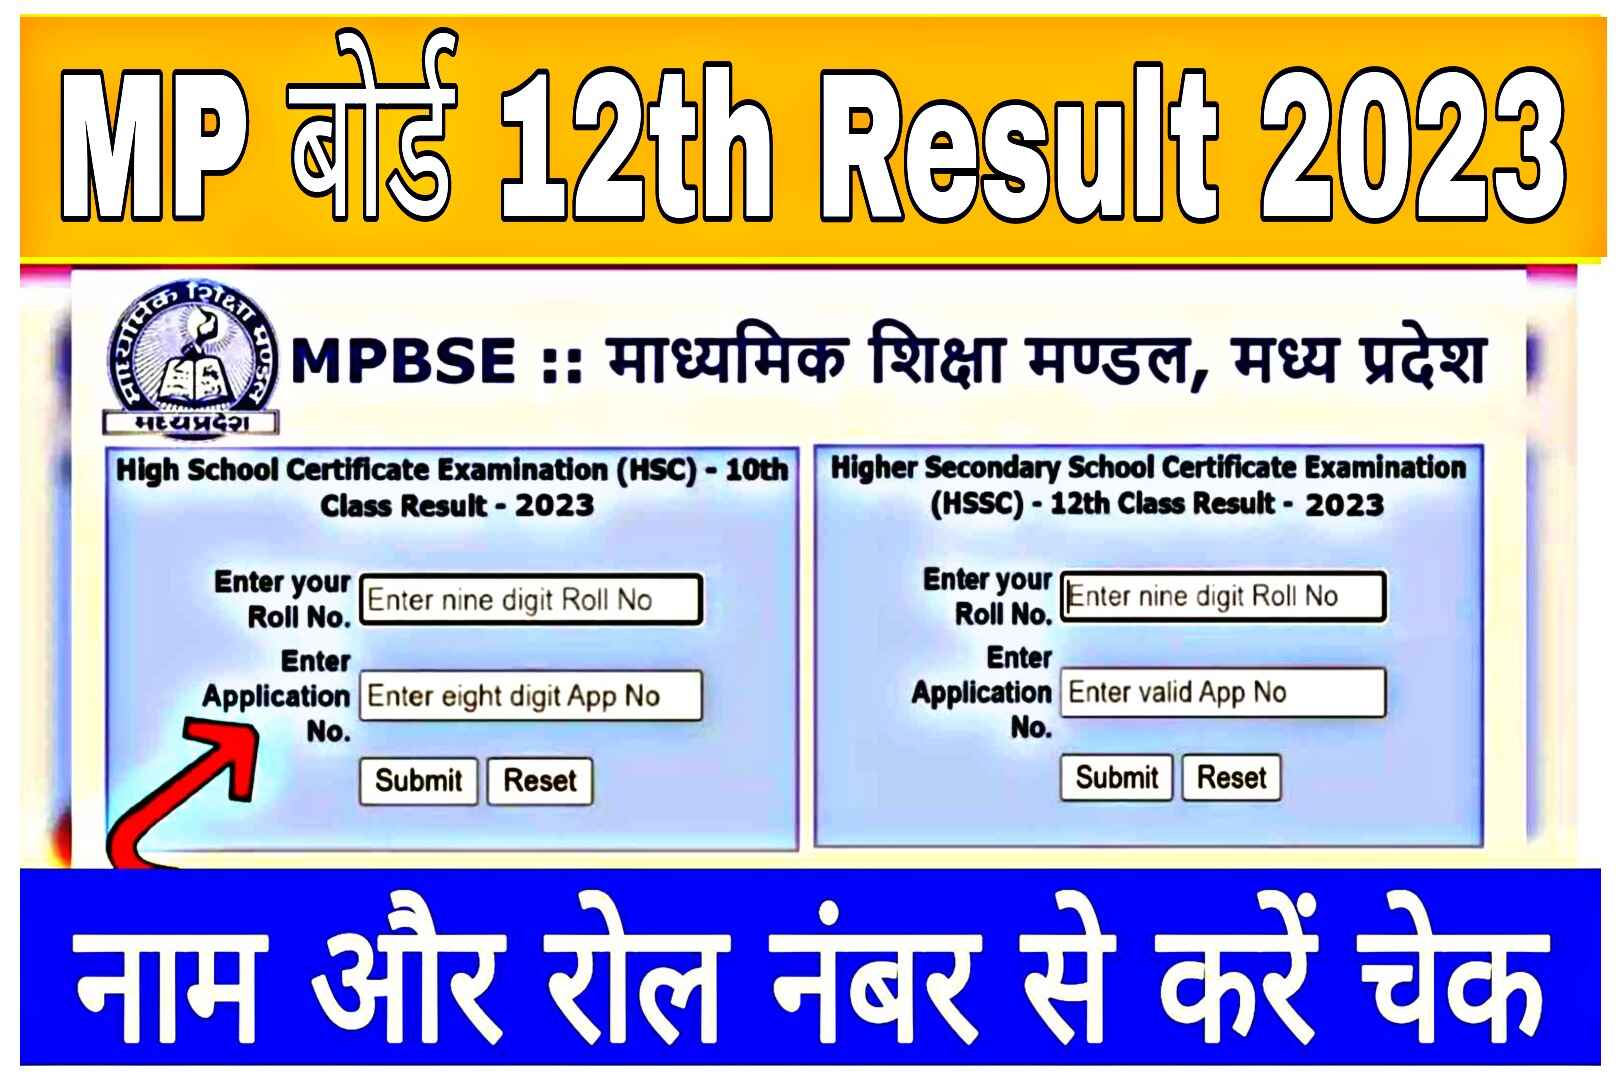 MP Board 12th Result 2023 Name Wise